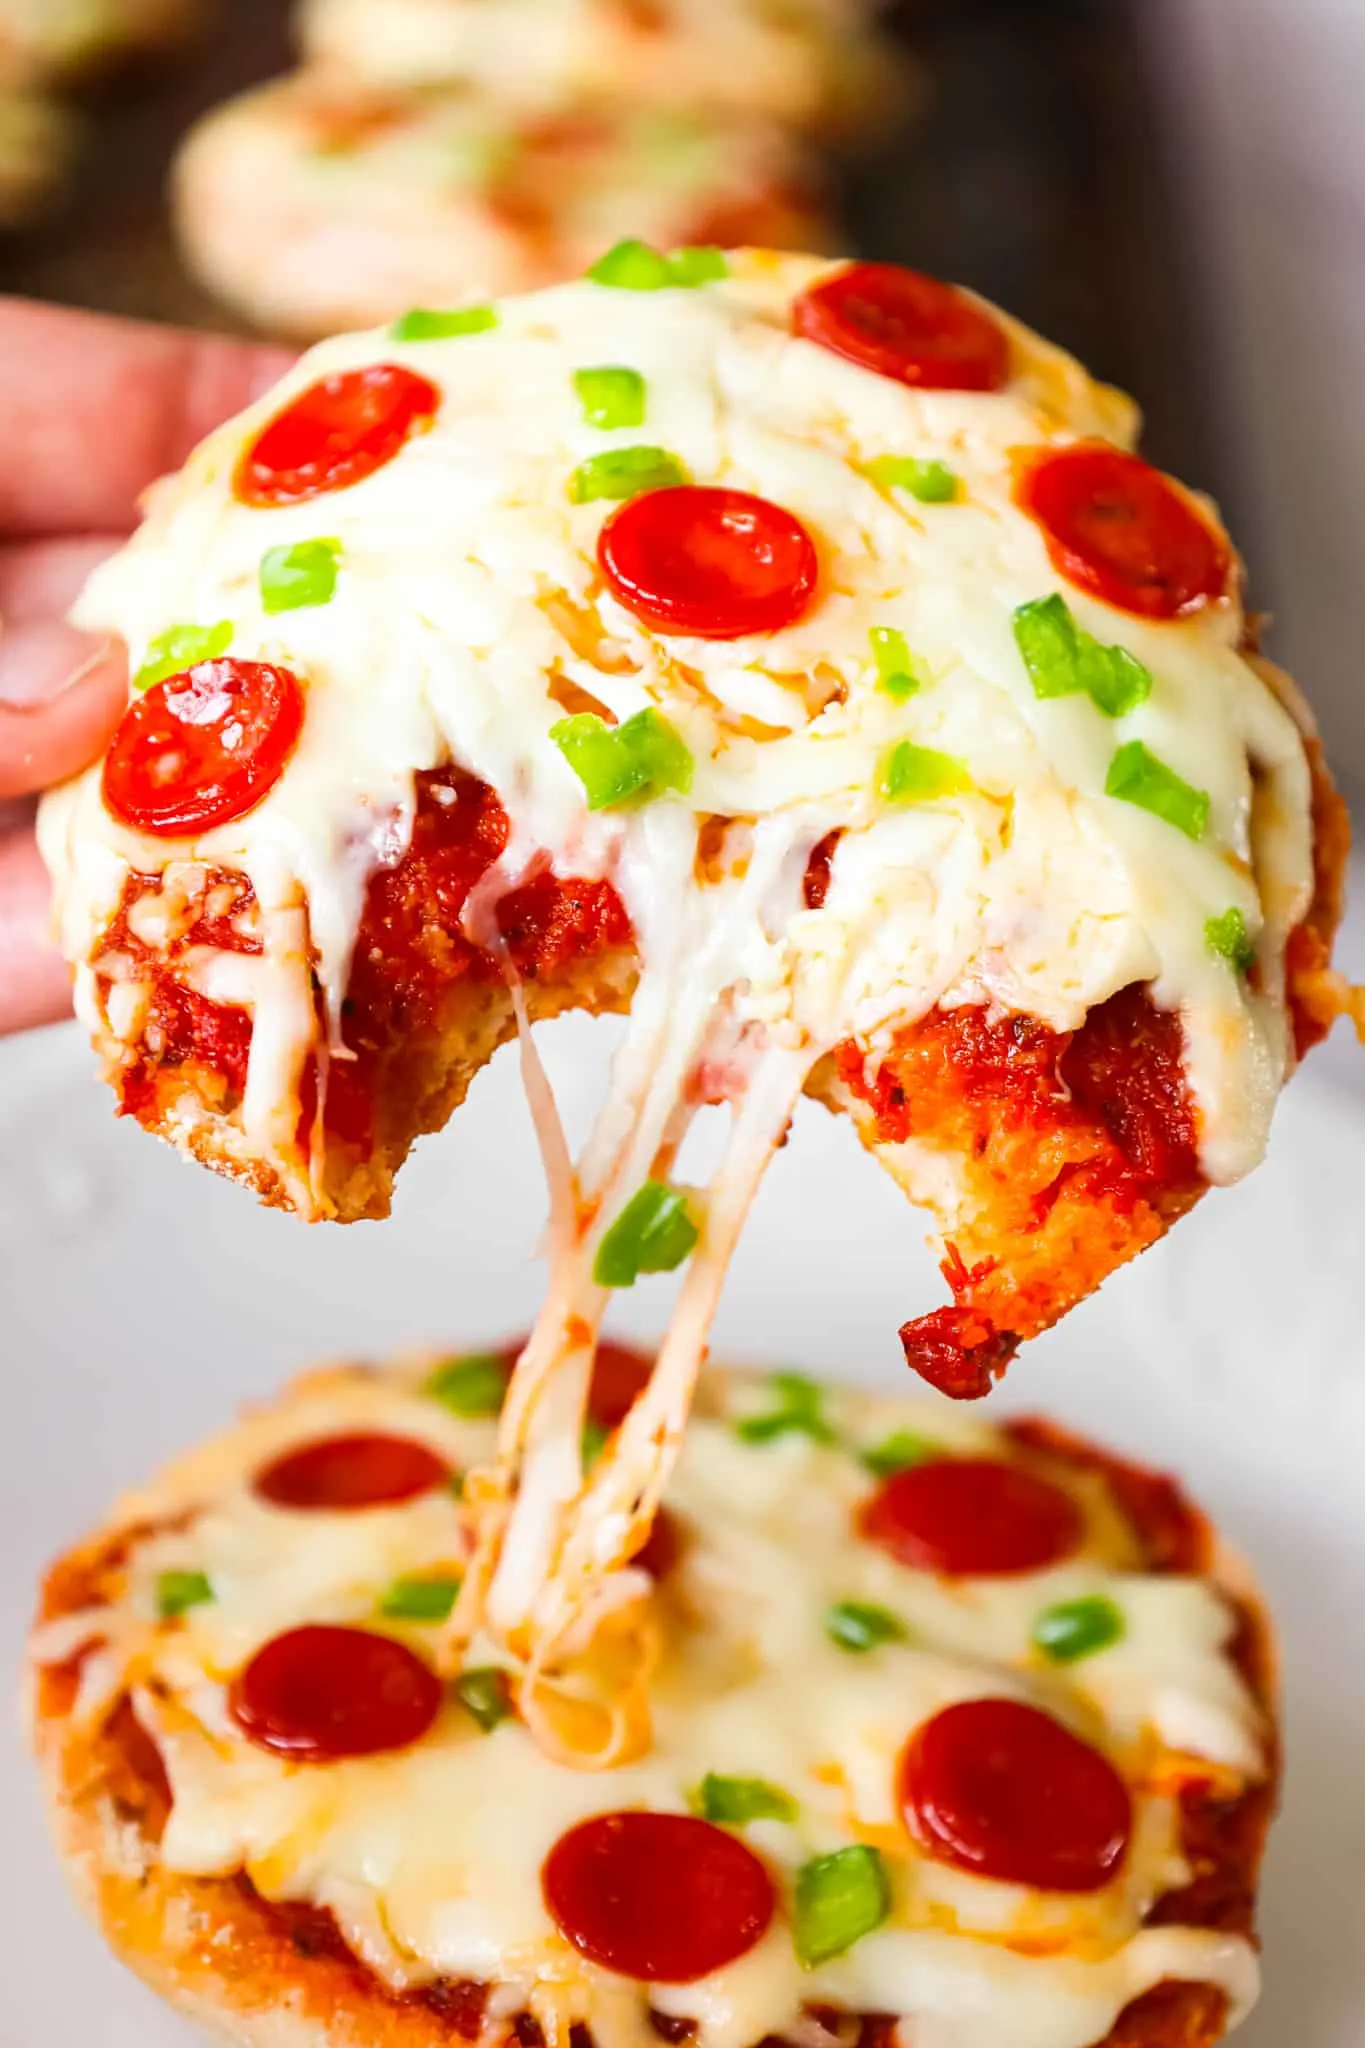 English Muffin Pizzas are an easy dinner recipe made with split English muffins topped with pizza sauce, shredded mozzarella cheese, mini pepperonis and diced green peppers.